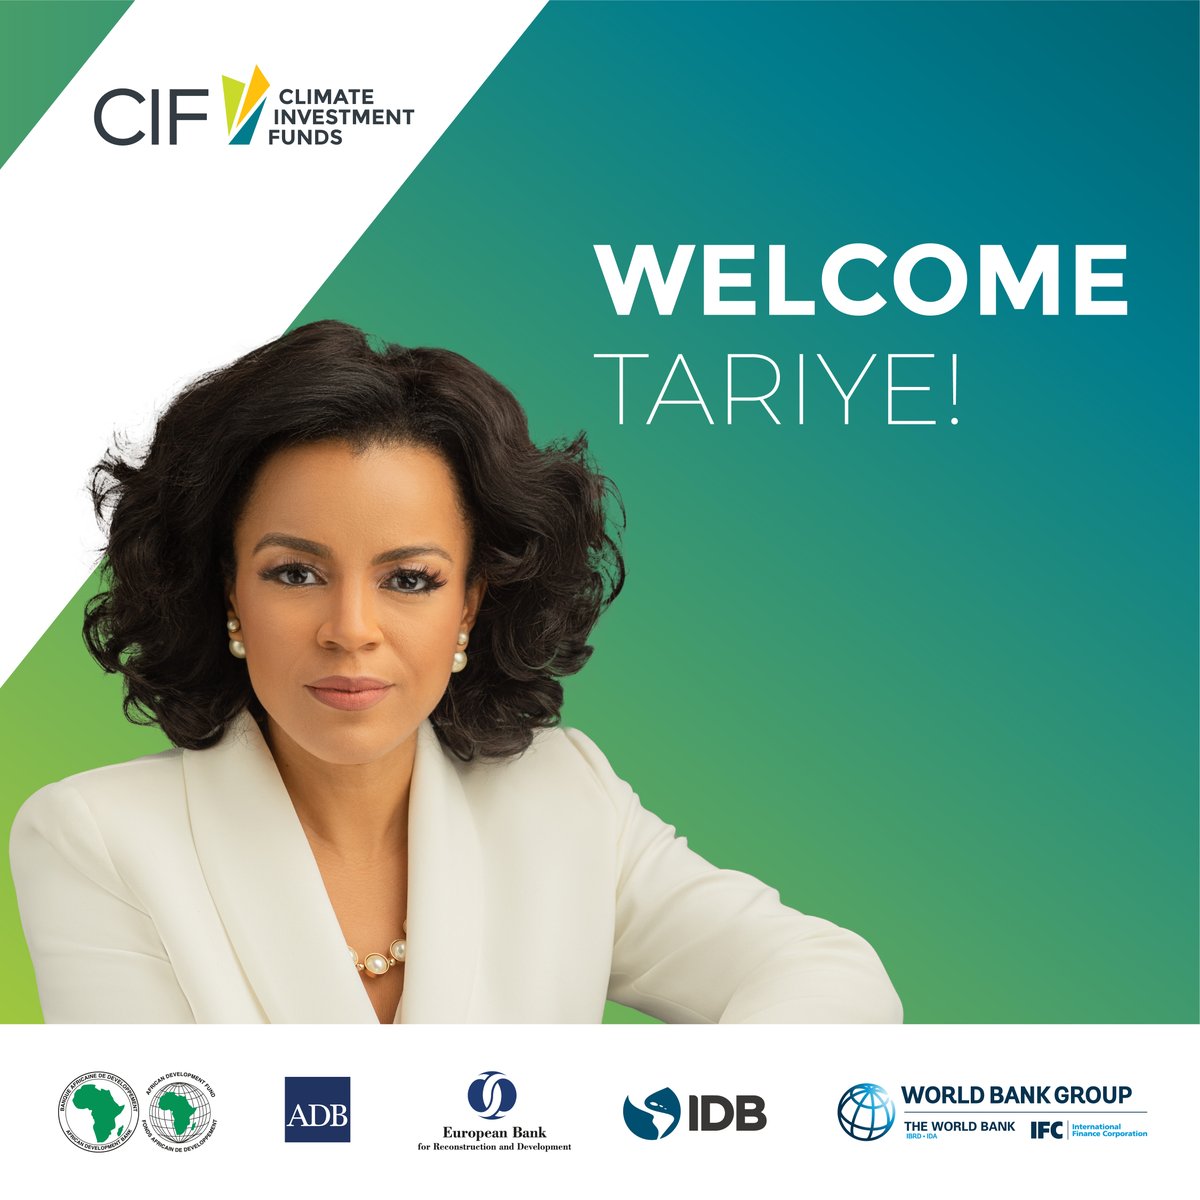 🎉 Congratulations to @tariyeg, the new CEO of @CIF_Action! Our partnership with CIF strengthens our ability to help our regions adapt to climate change threats and mitigate greenhouse gas emissions. Together, we are making a meaningful impact! #EBRDdonors #ClimateAction